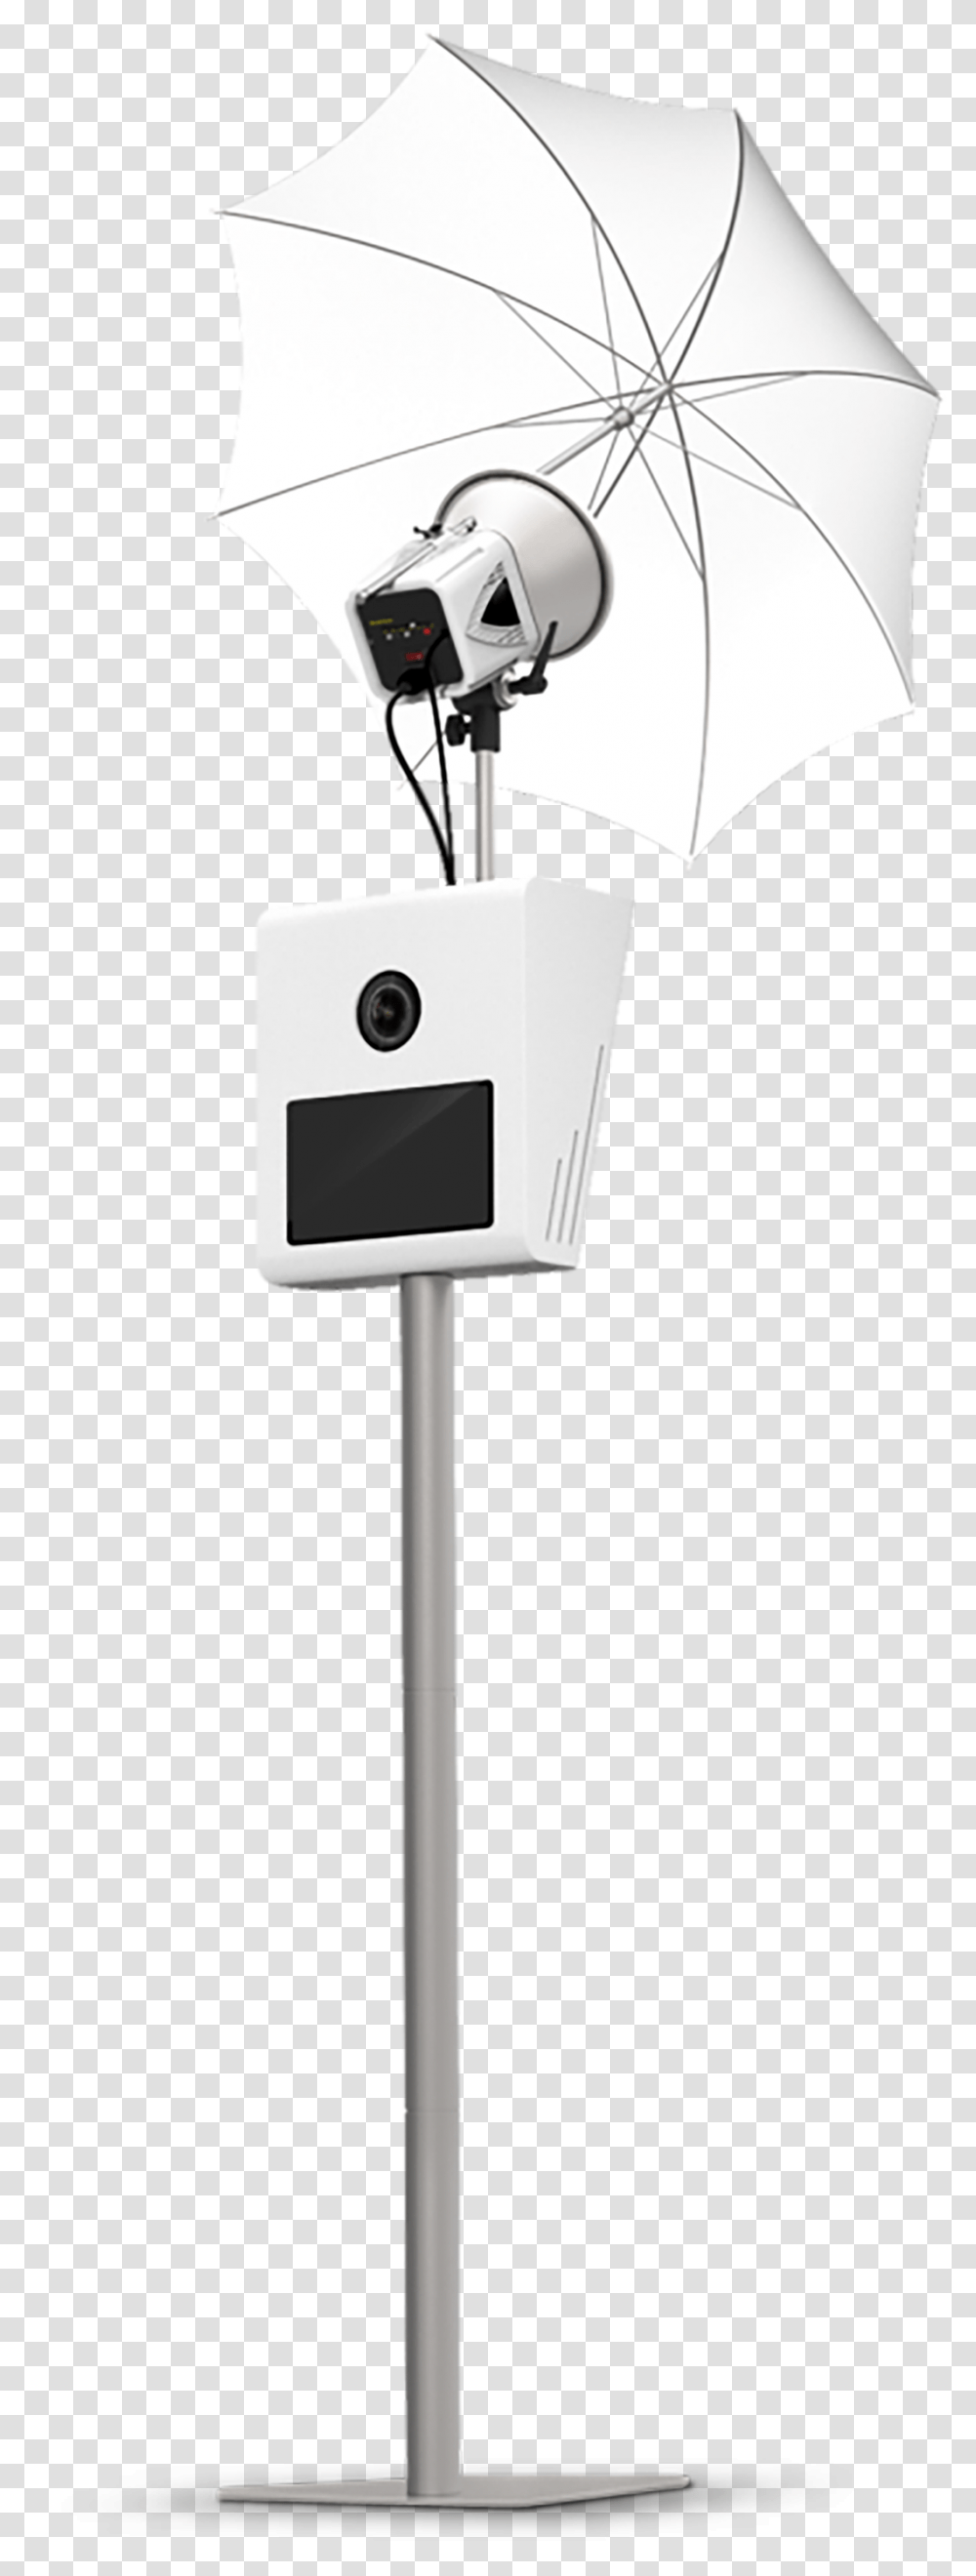 Photobooth With Umbrella, Adapter, Plug, Electrical Device Transparent Png